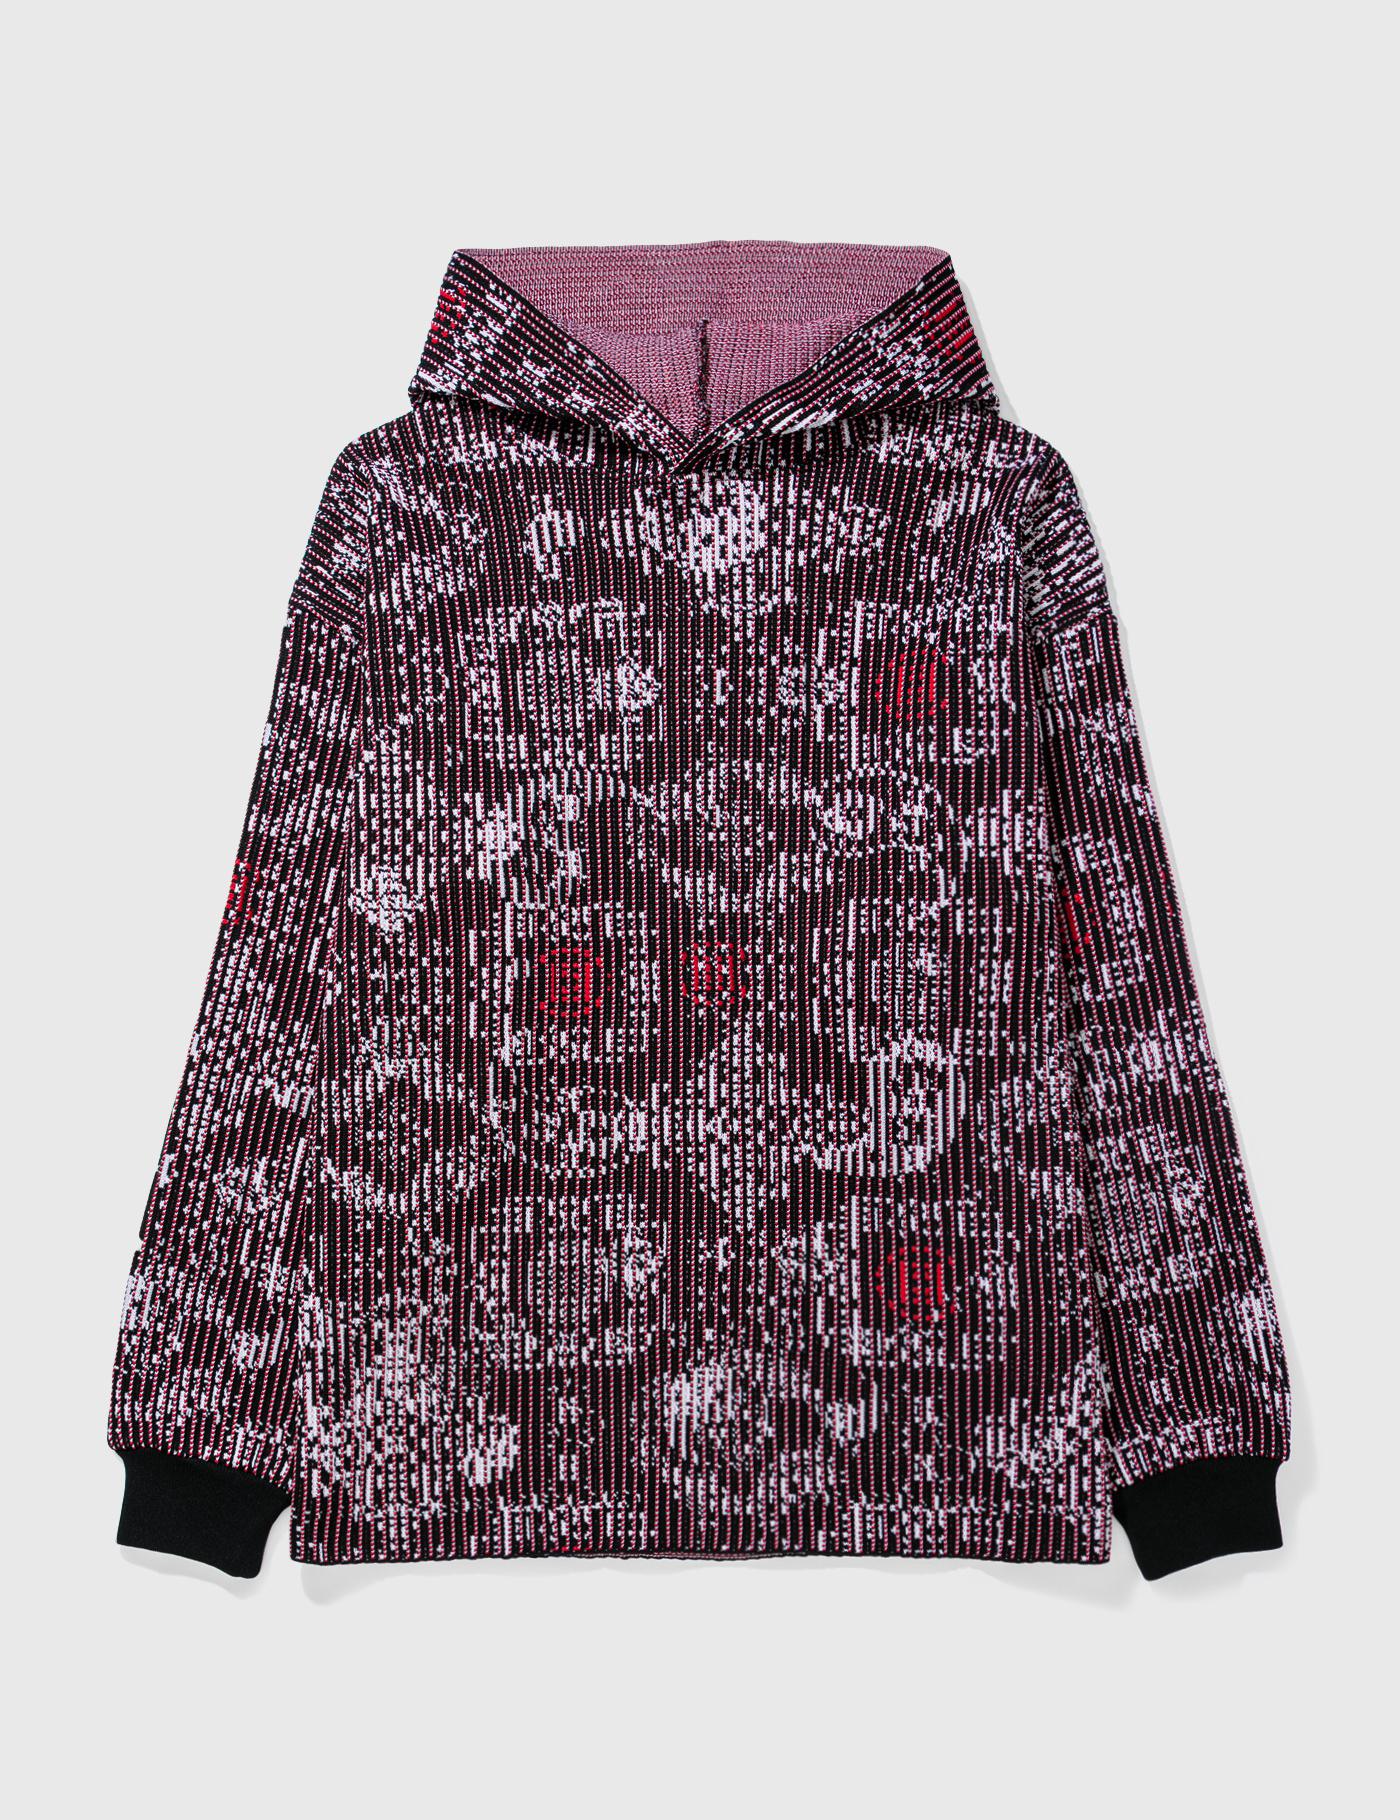 CLOT HOODED PULLOVER by CLOT